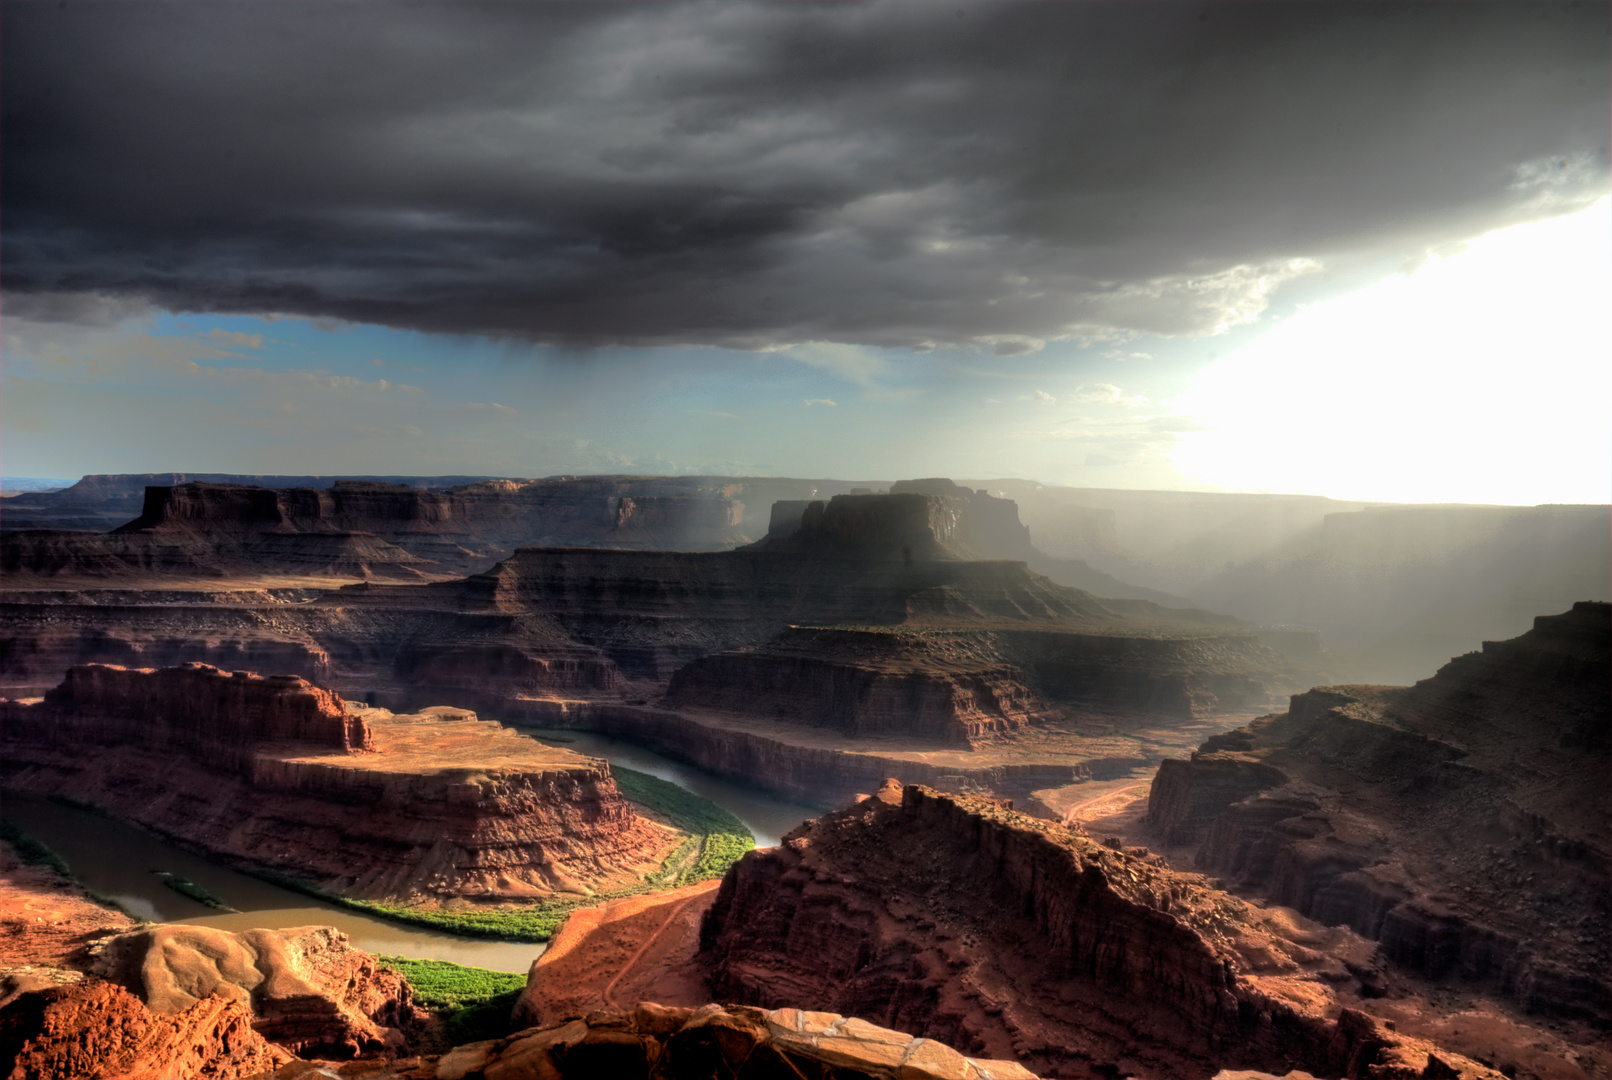 evening at dead horse point